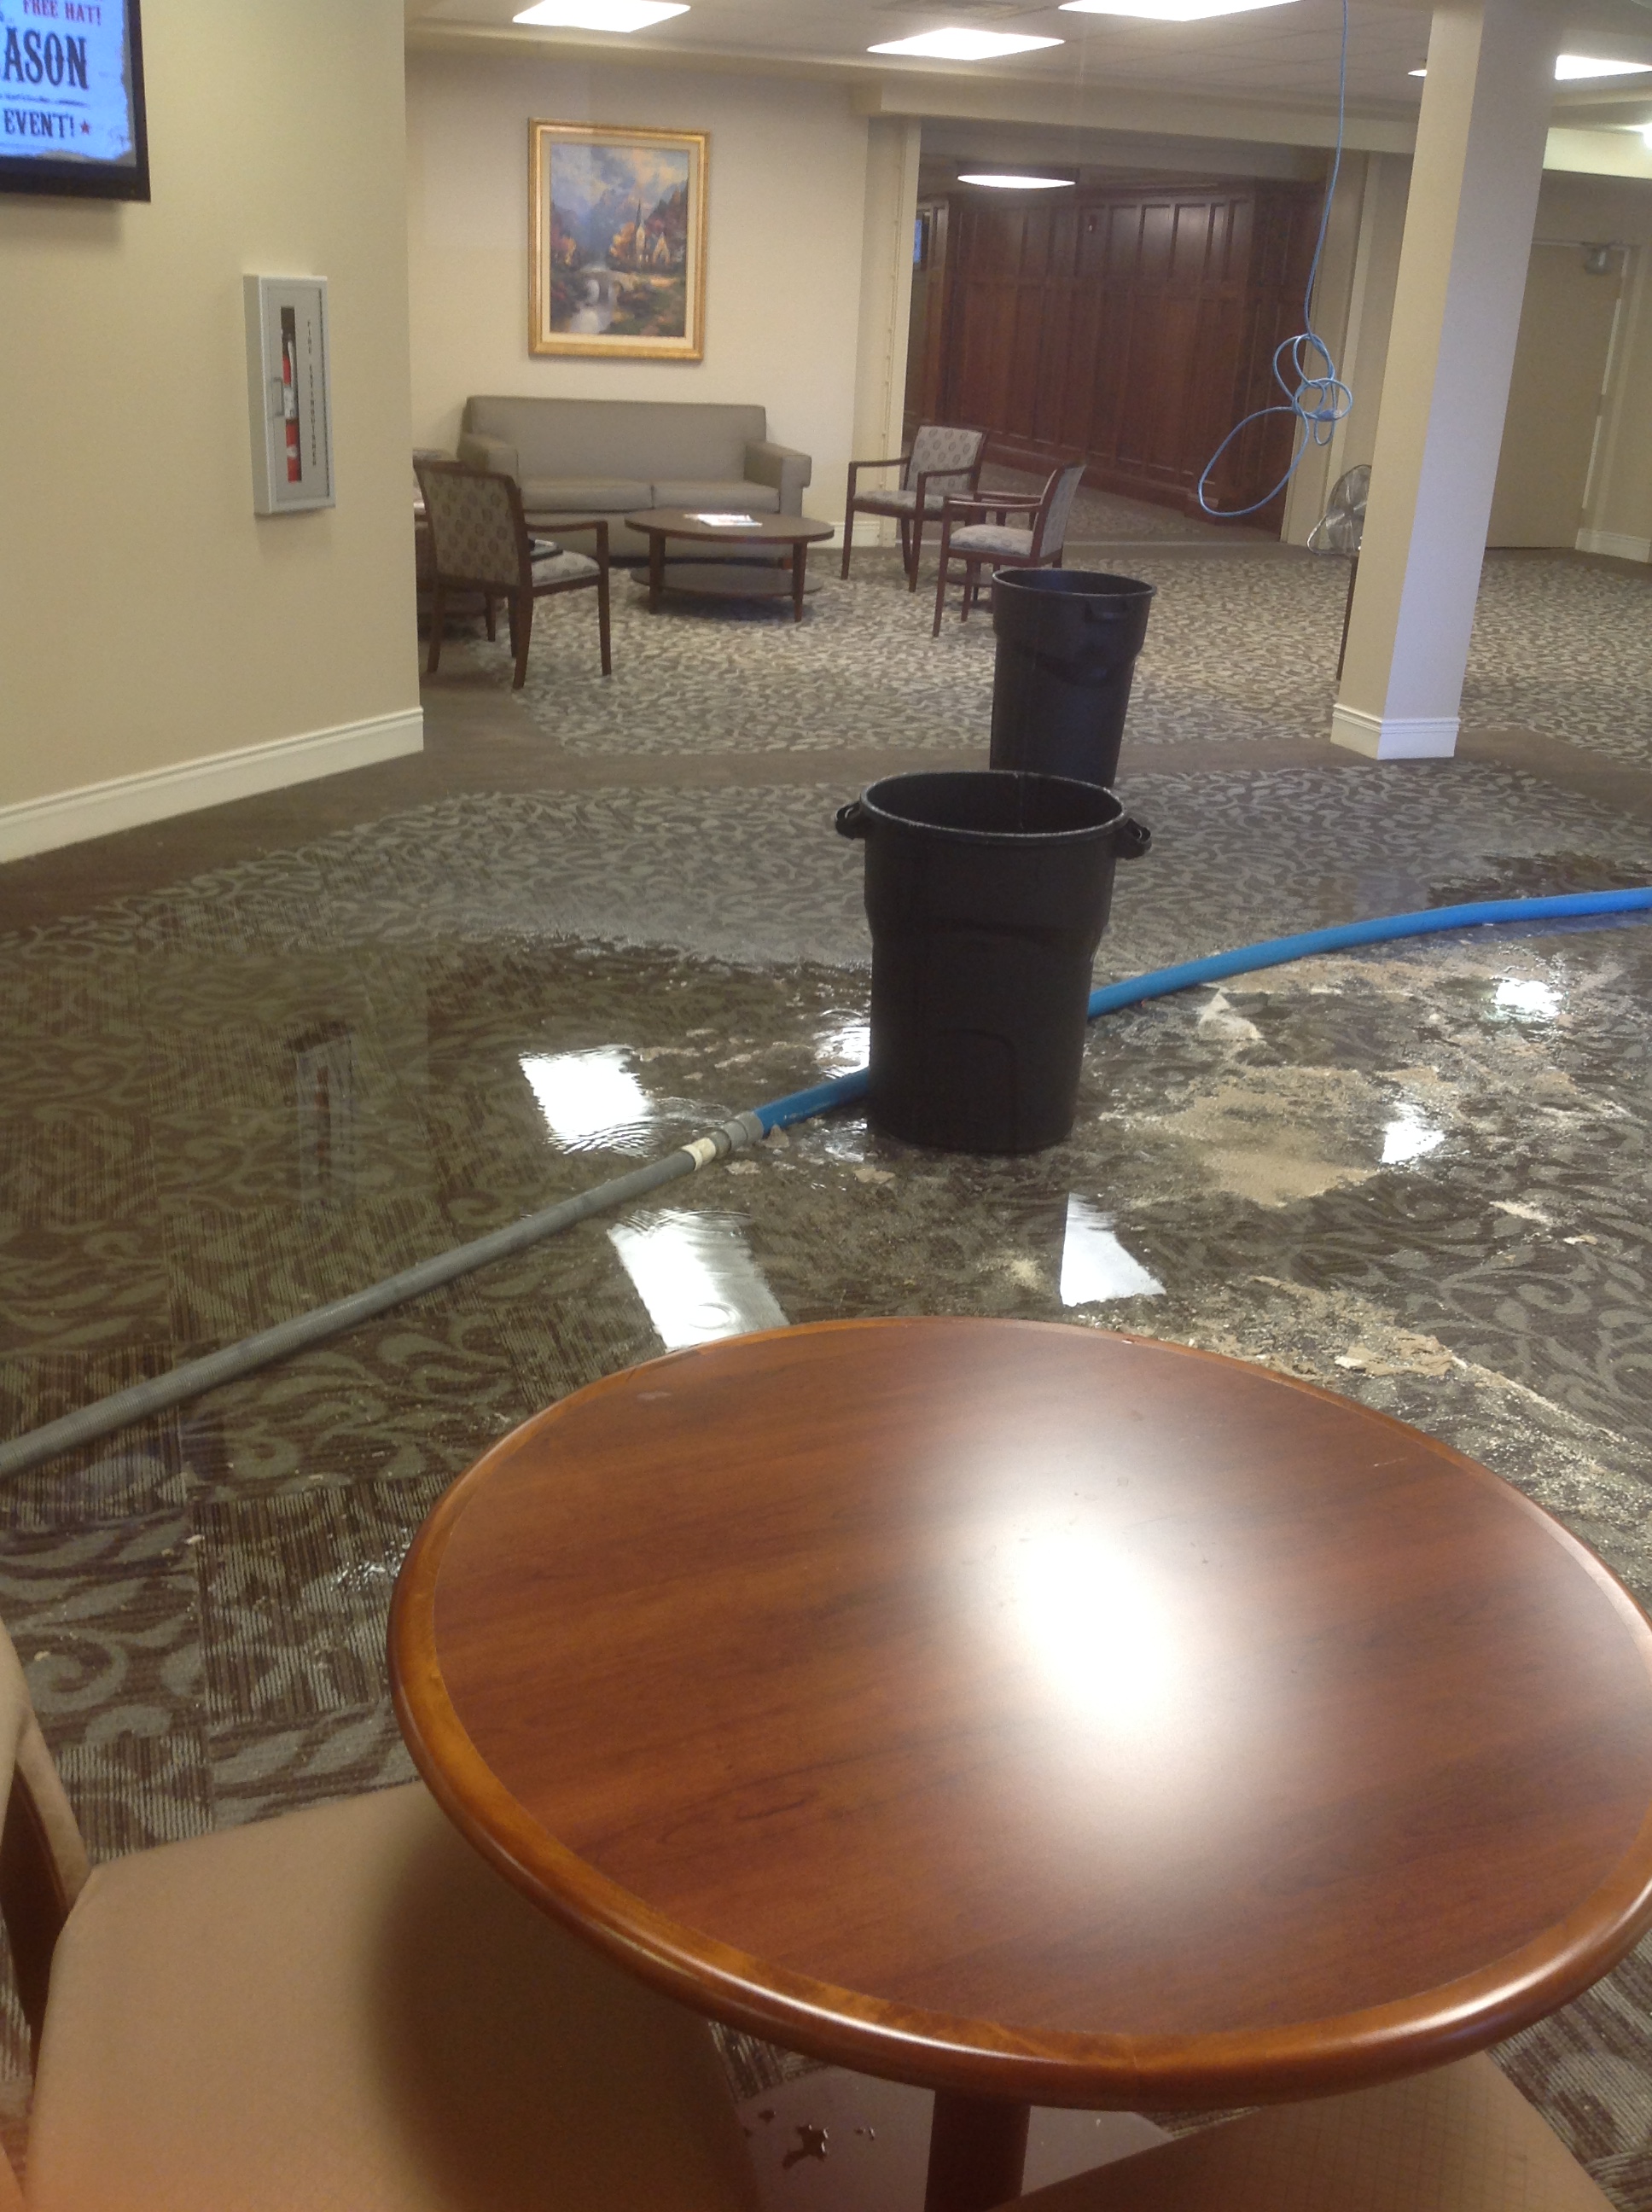 SERVPRO of Tyler responding to a severe commercial water loss.